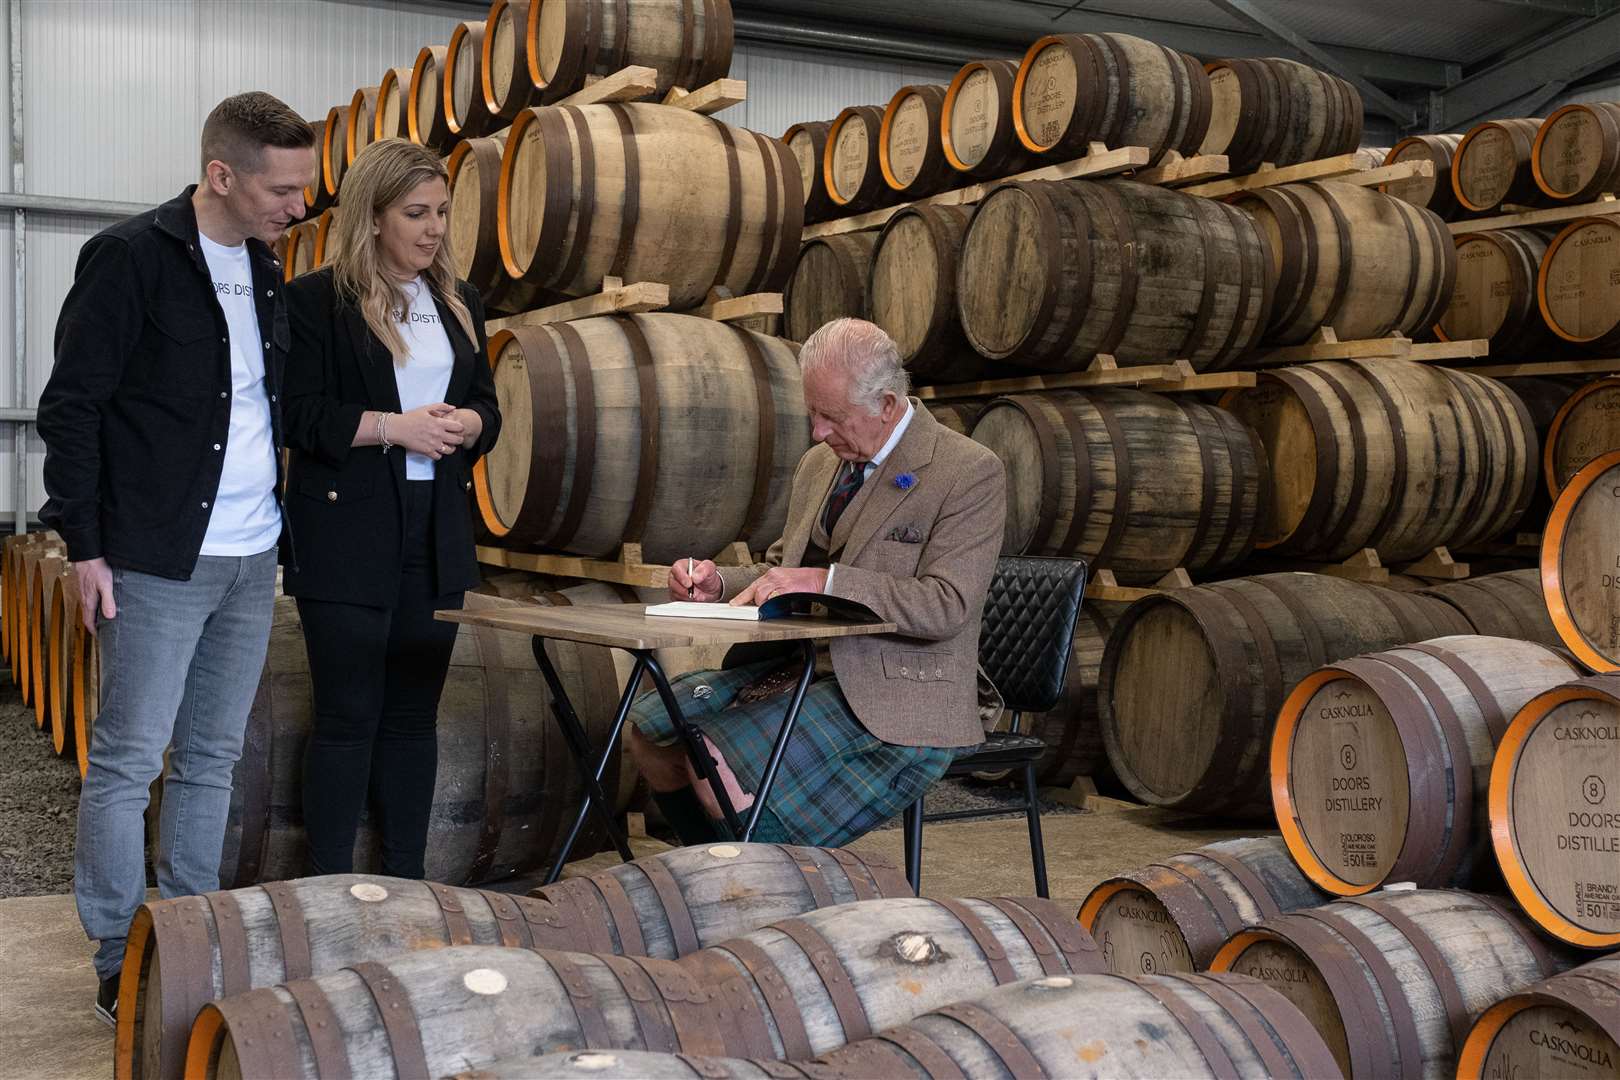 The King signing the visitors' book in the warehouse at 8 Doors Distillery. Picture: Susie Mackenzie